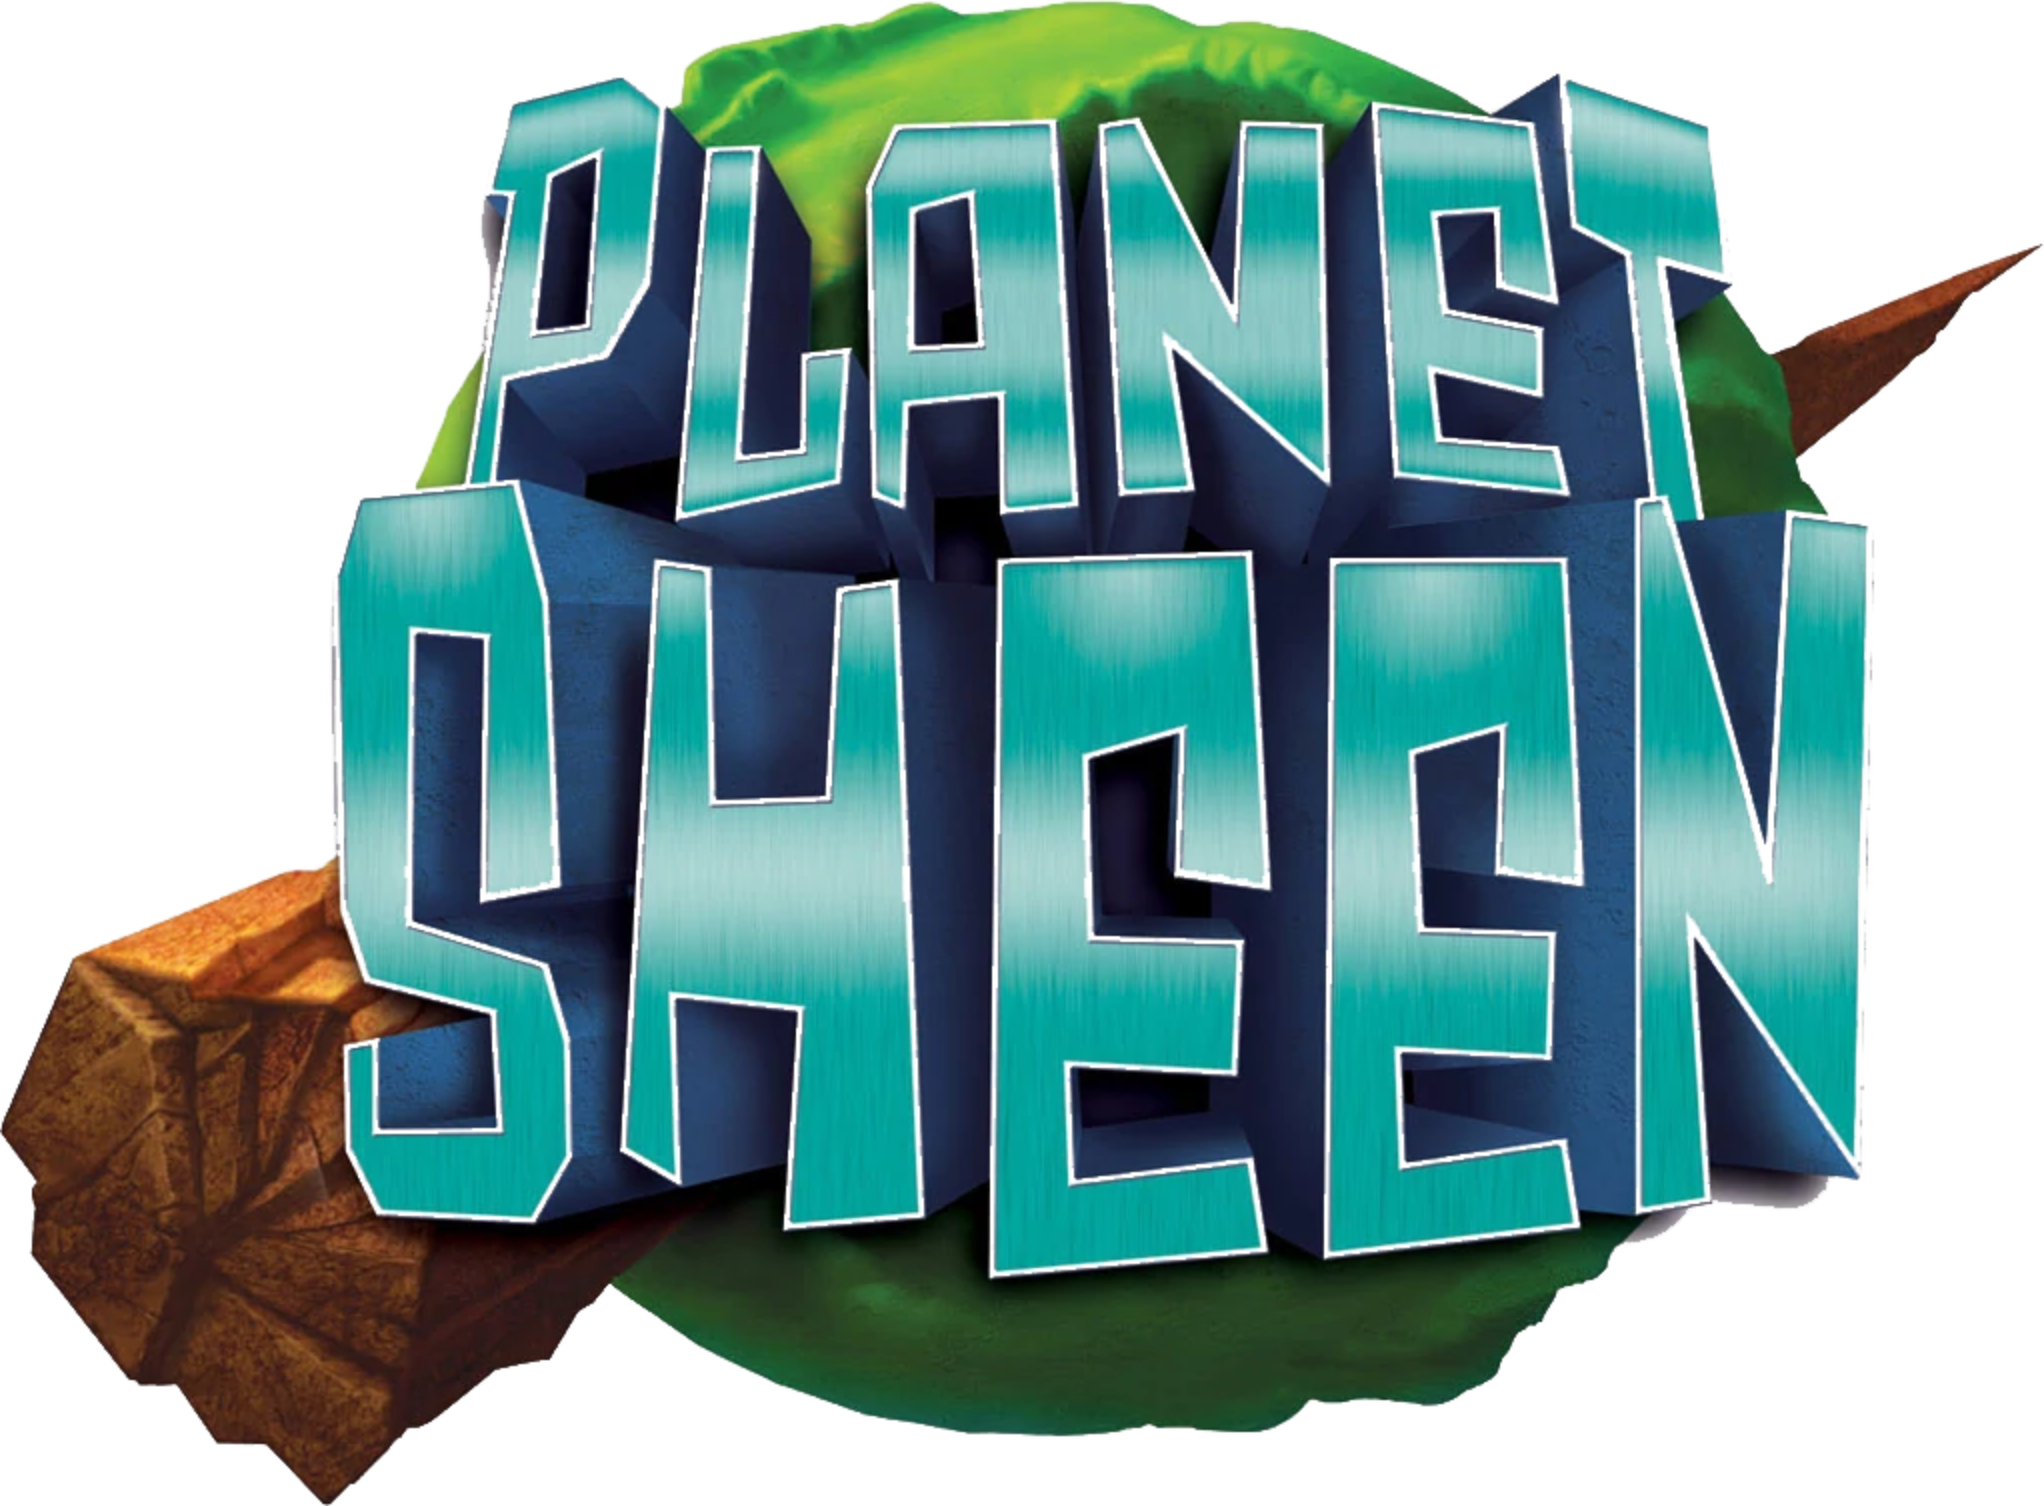 Planet Sheen Complete 